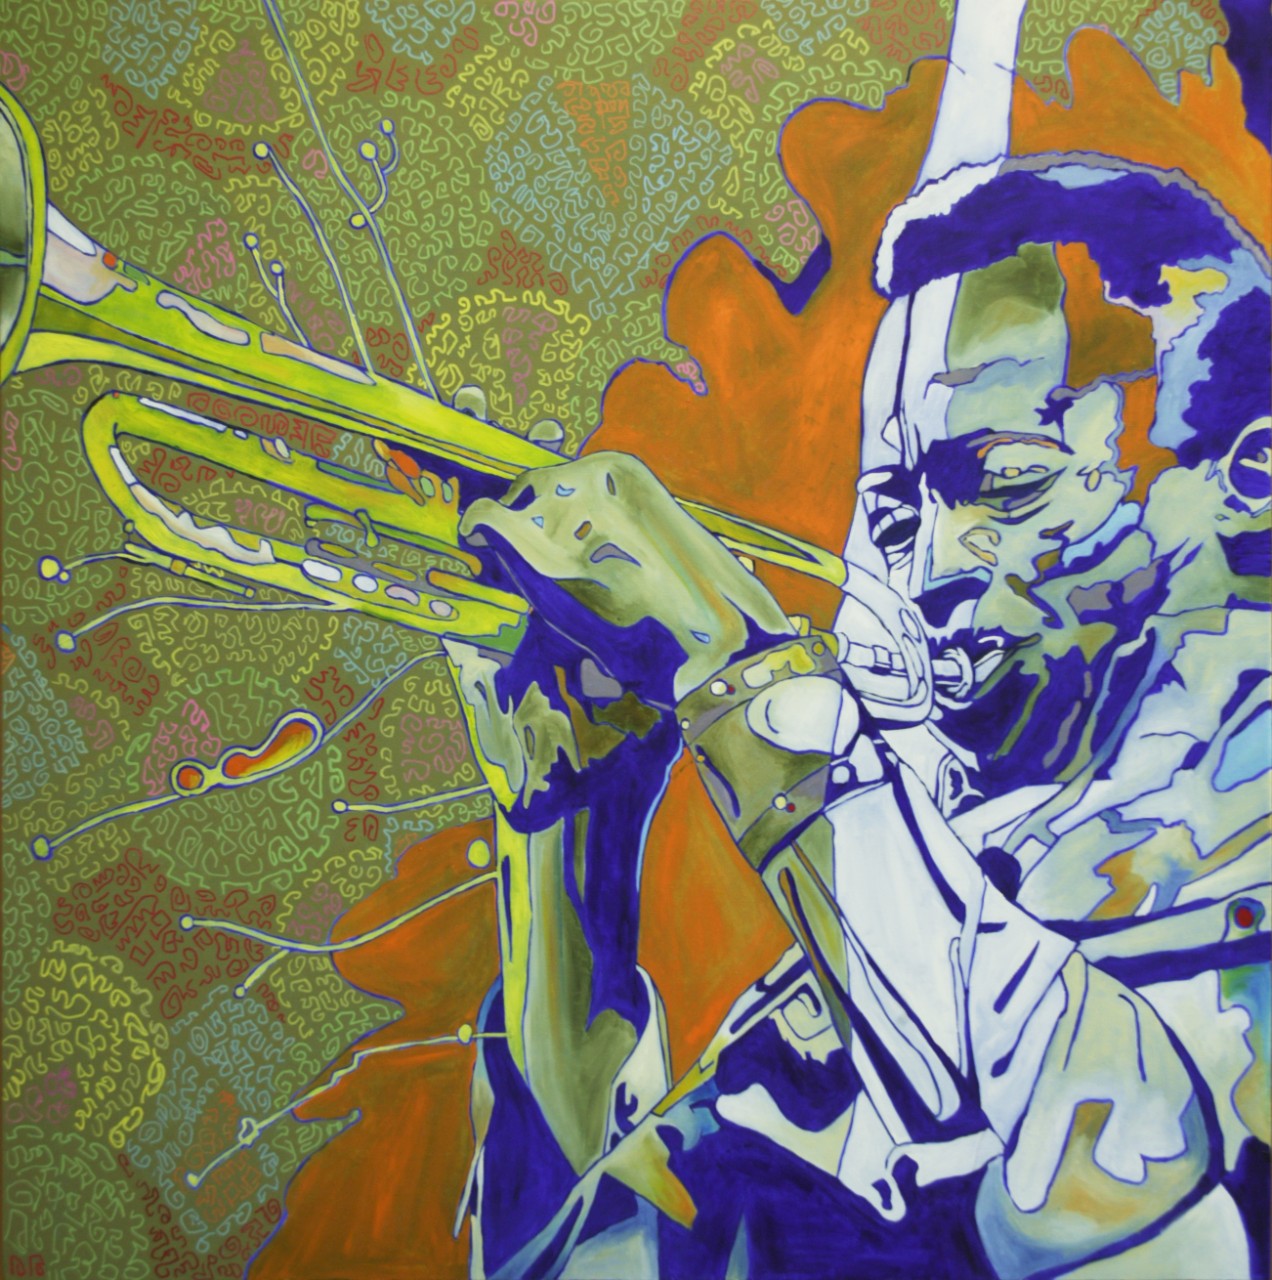 A painting of jazz musician Miles Davis playing his trumpet. The painting shows Miles in a detailed sketch of bold lines and shades of blues. He is against a background with various patterns of orange and greens and yellows. Lines and shapes emerge from the figure of the trumpet that look like small tree limbs and buds.